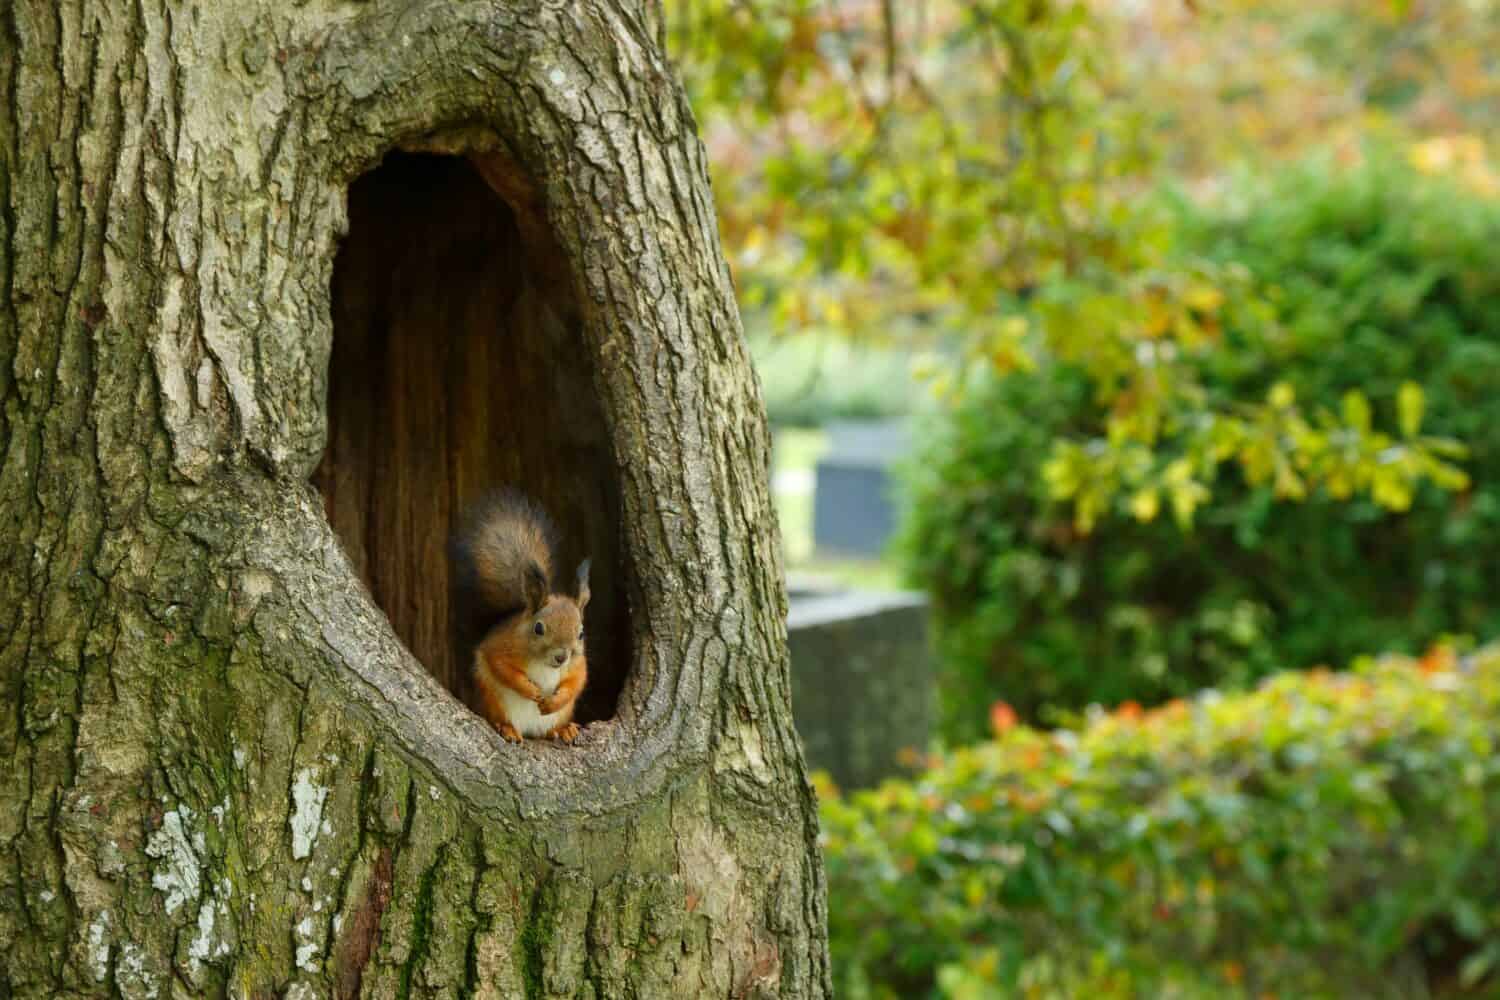 The squirrel sits in a big hole in the trunk of an oak tree